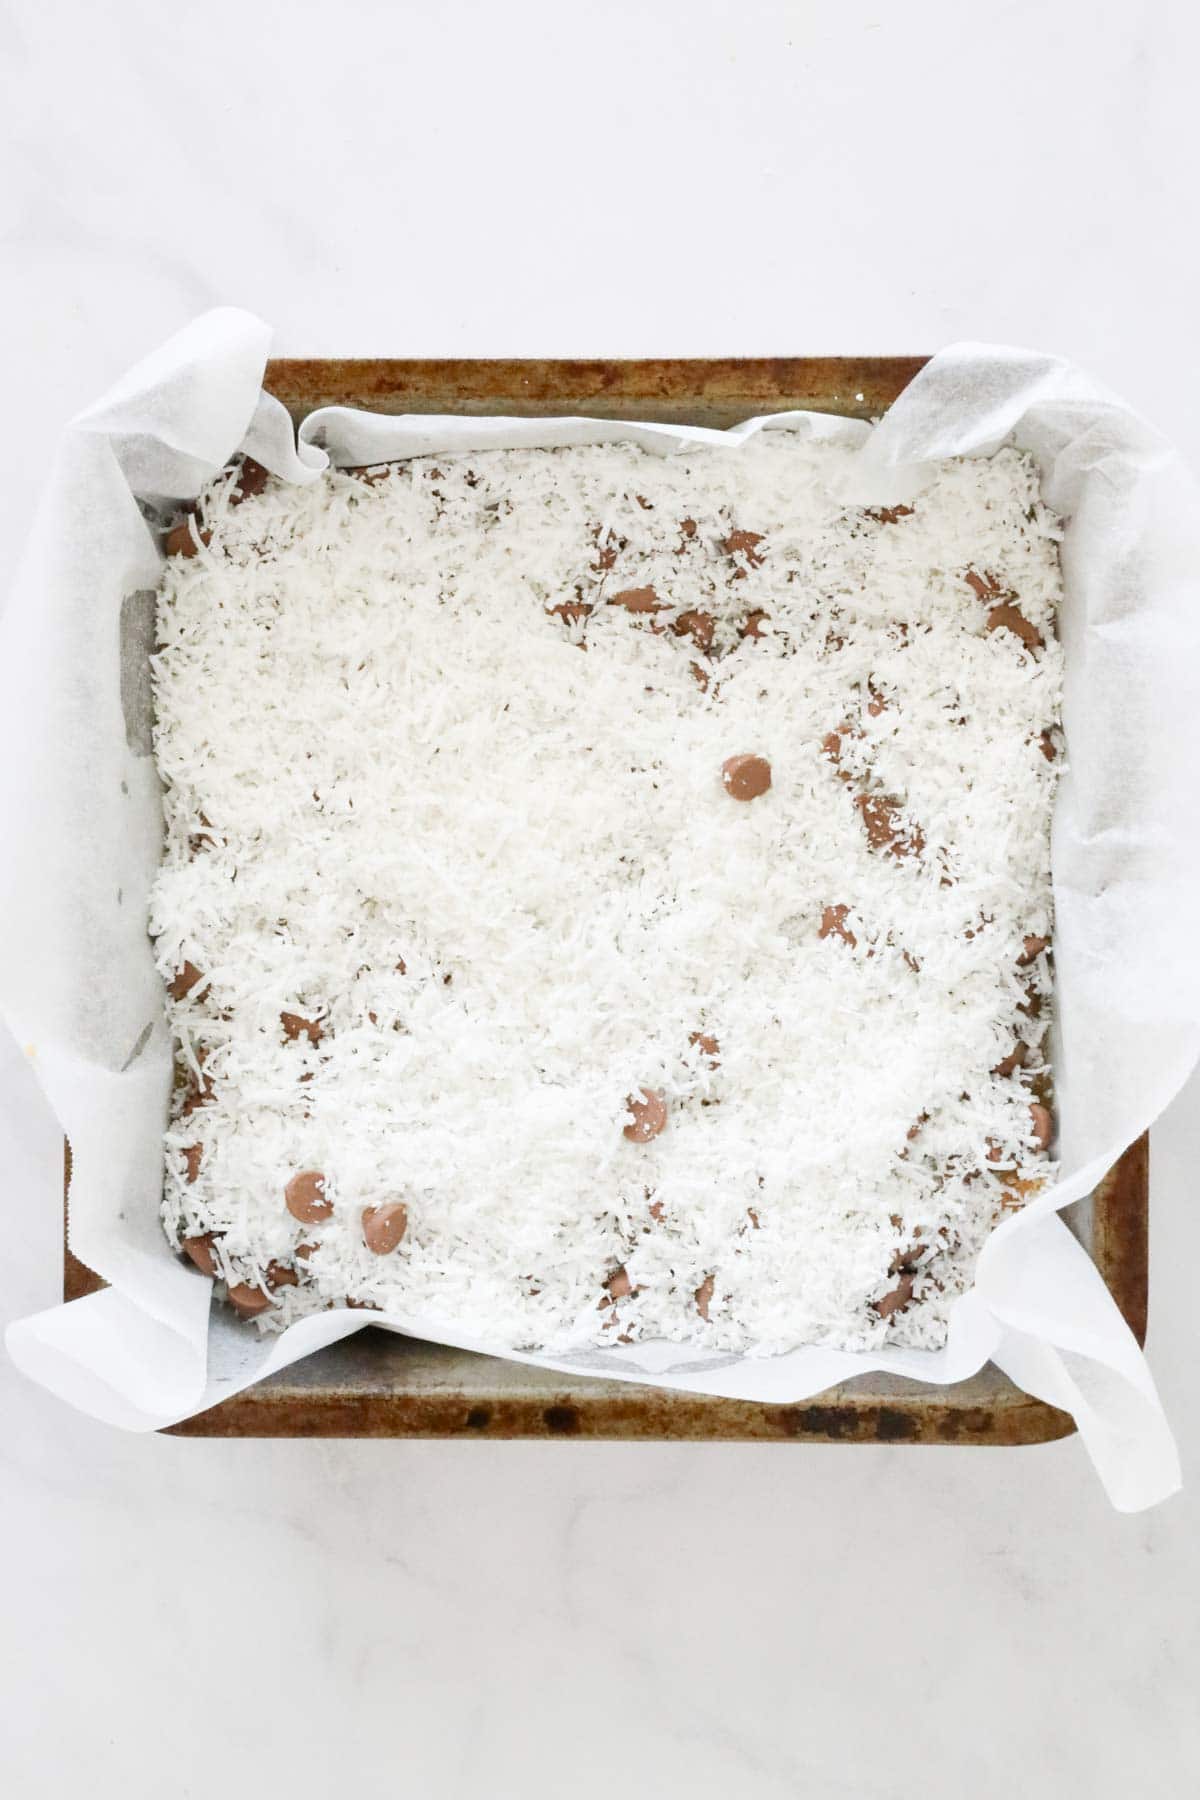 Shredded coconut sprinkled over the chocolate chips in an even layer.